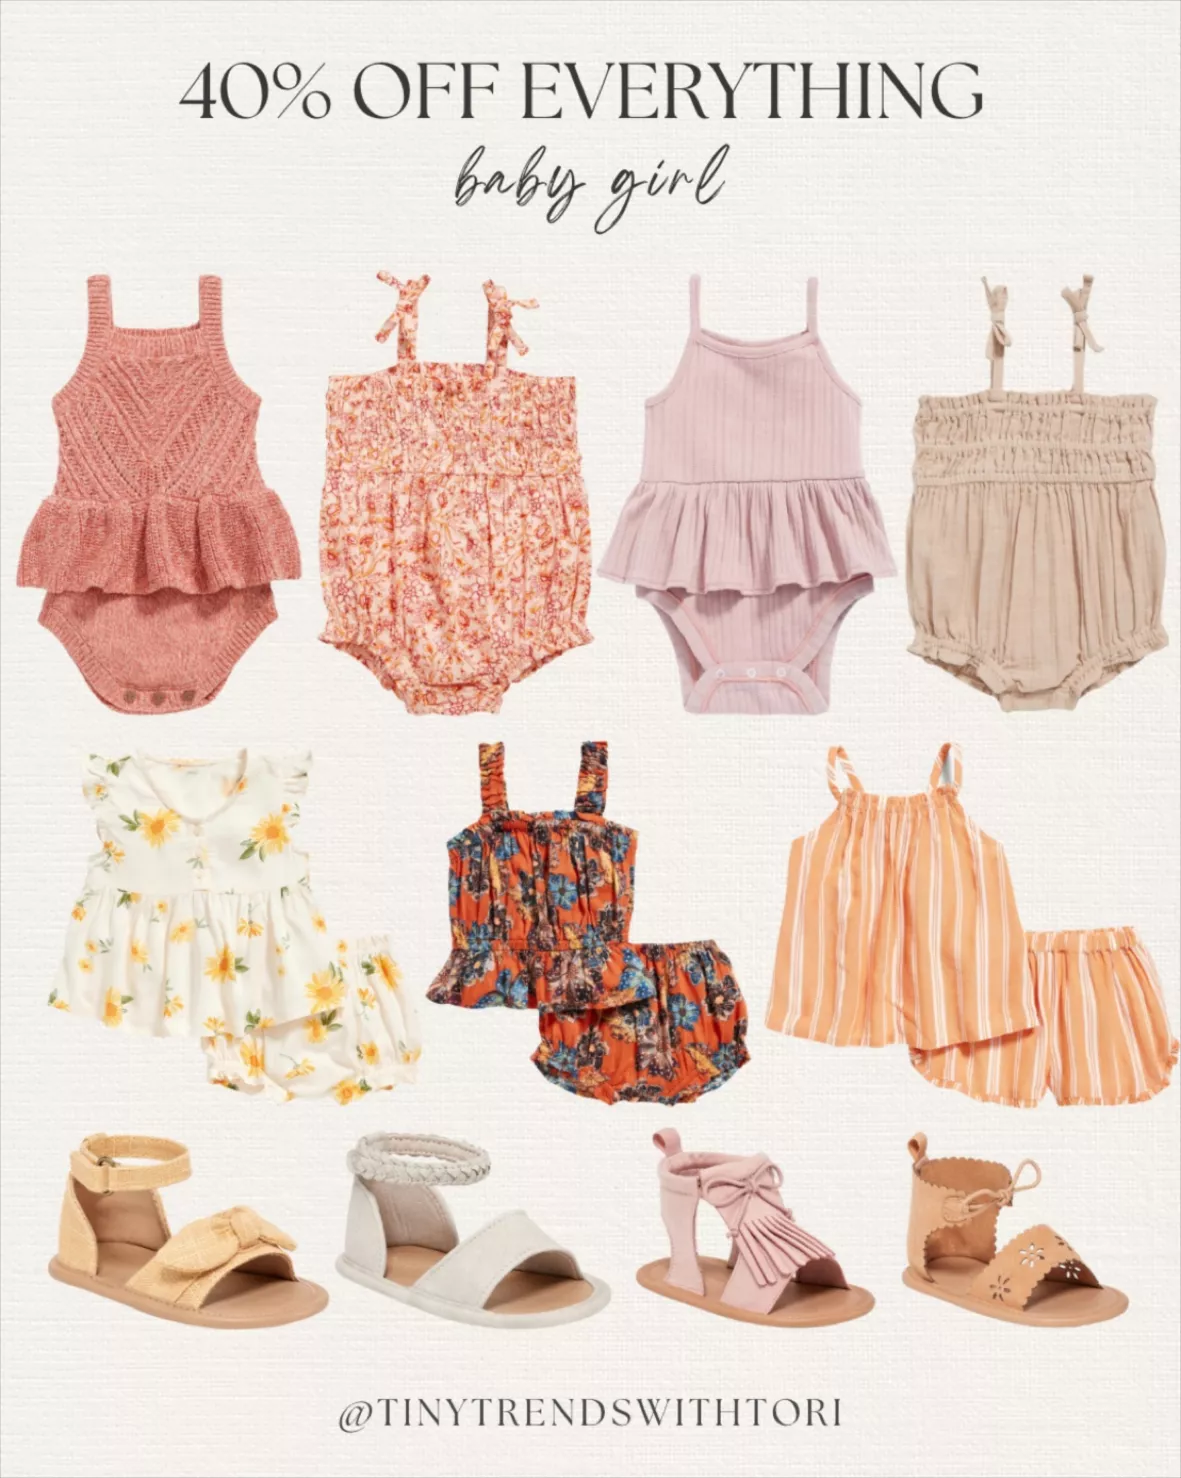 Dressing Little Girls  Spring Styles from Old Navy